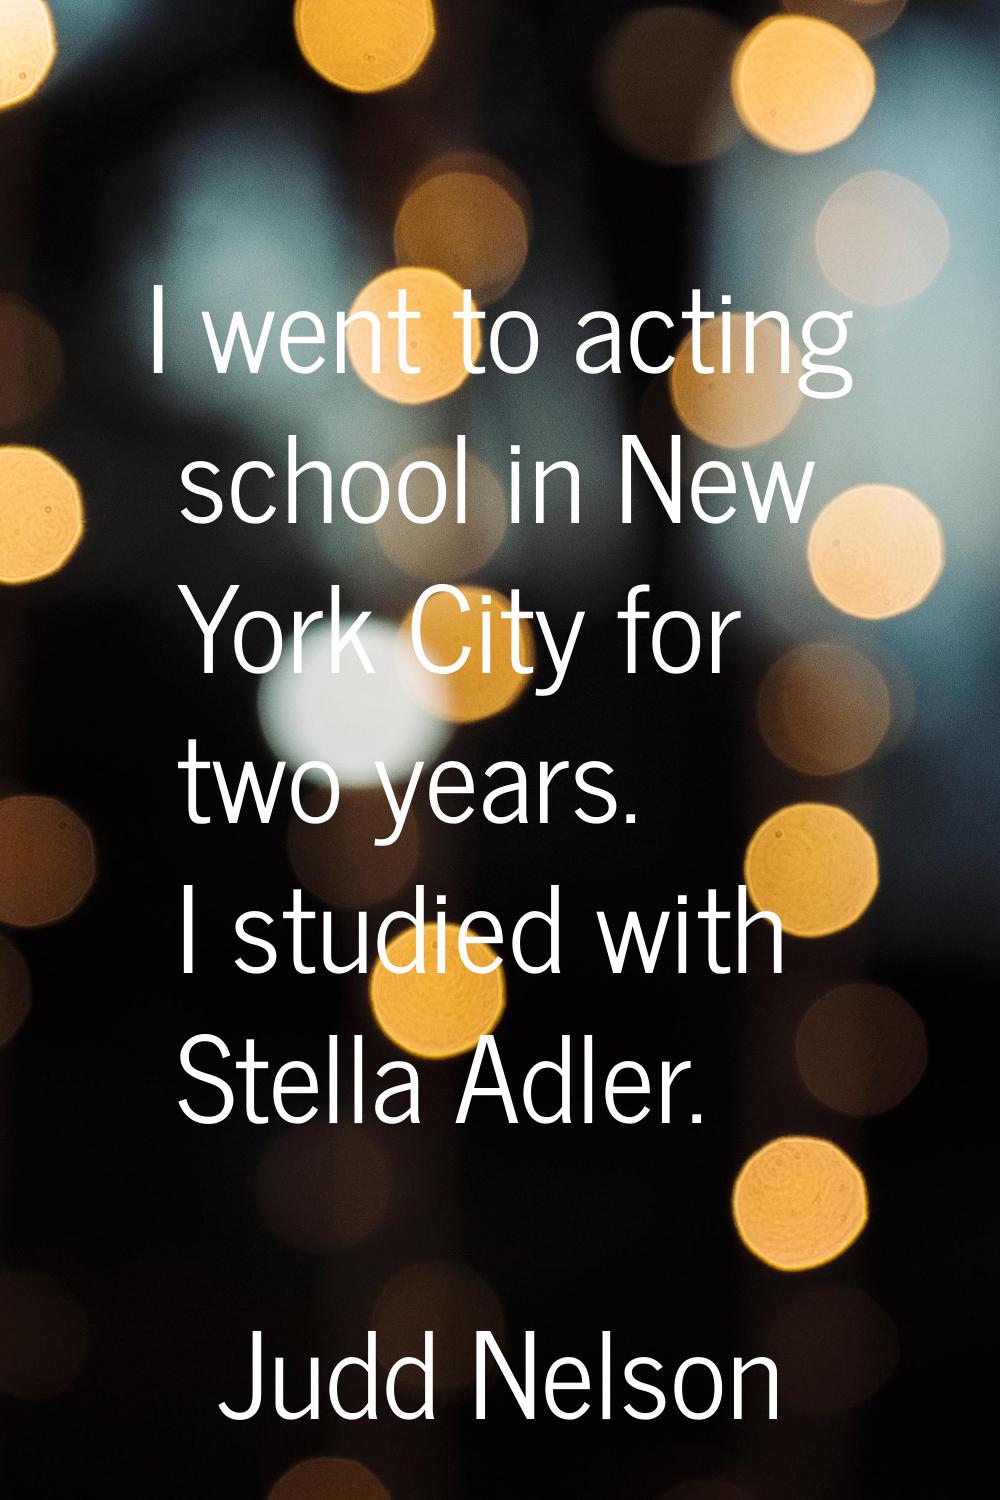 I went to acting school in New York City for two years. I studied with Stella Adler.